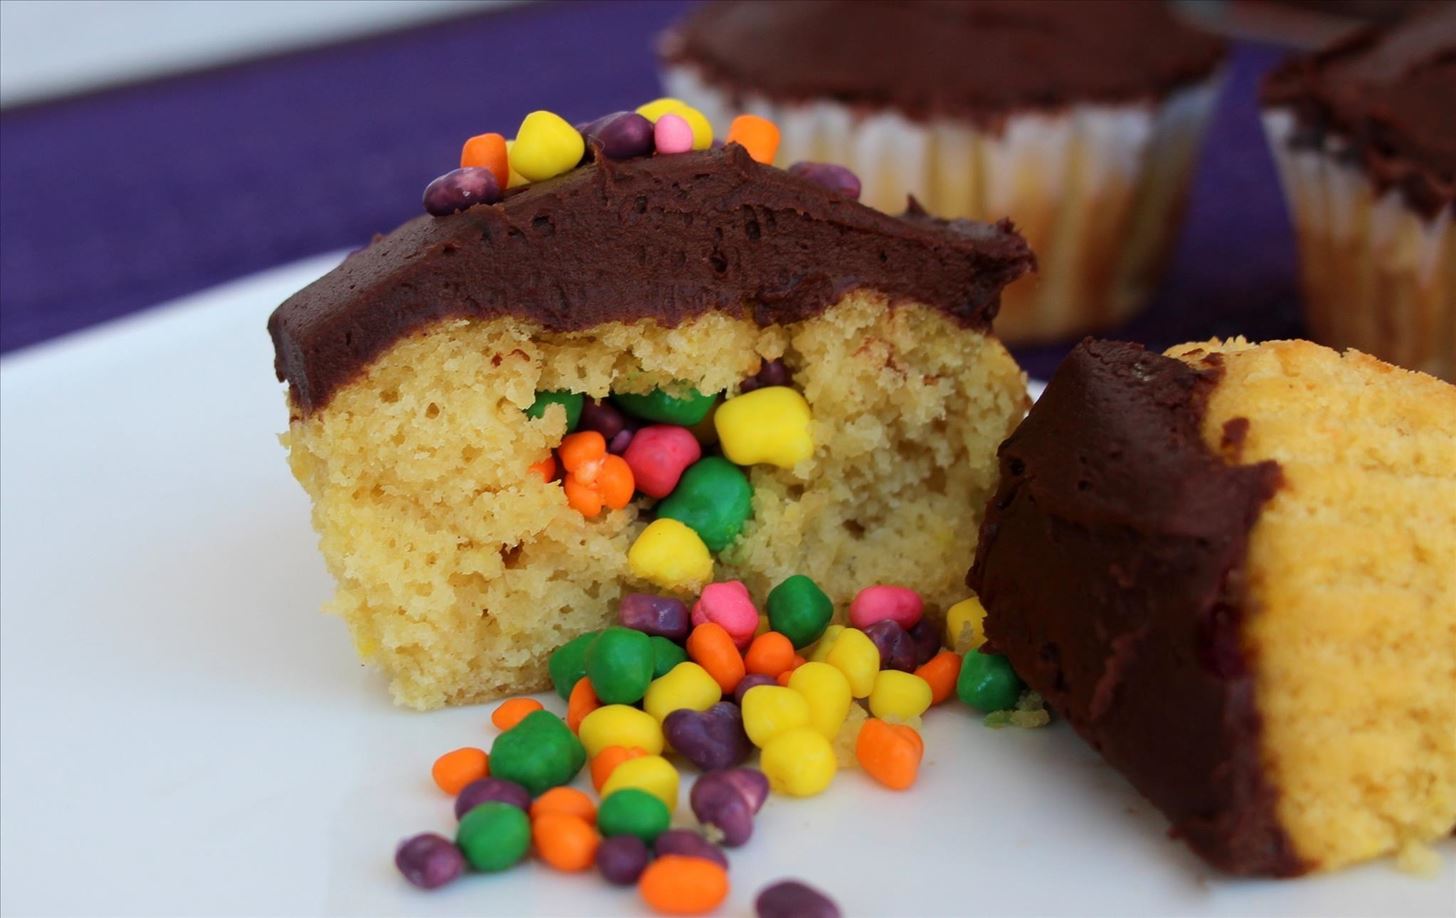 Surprise! These Clever Piñata Cupcakes Will Delight Your Friends